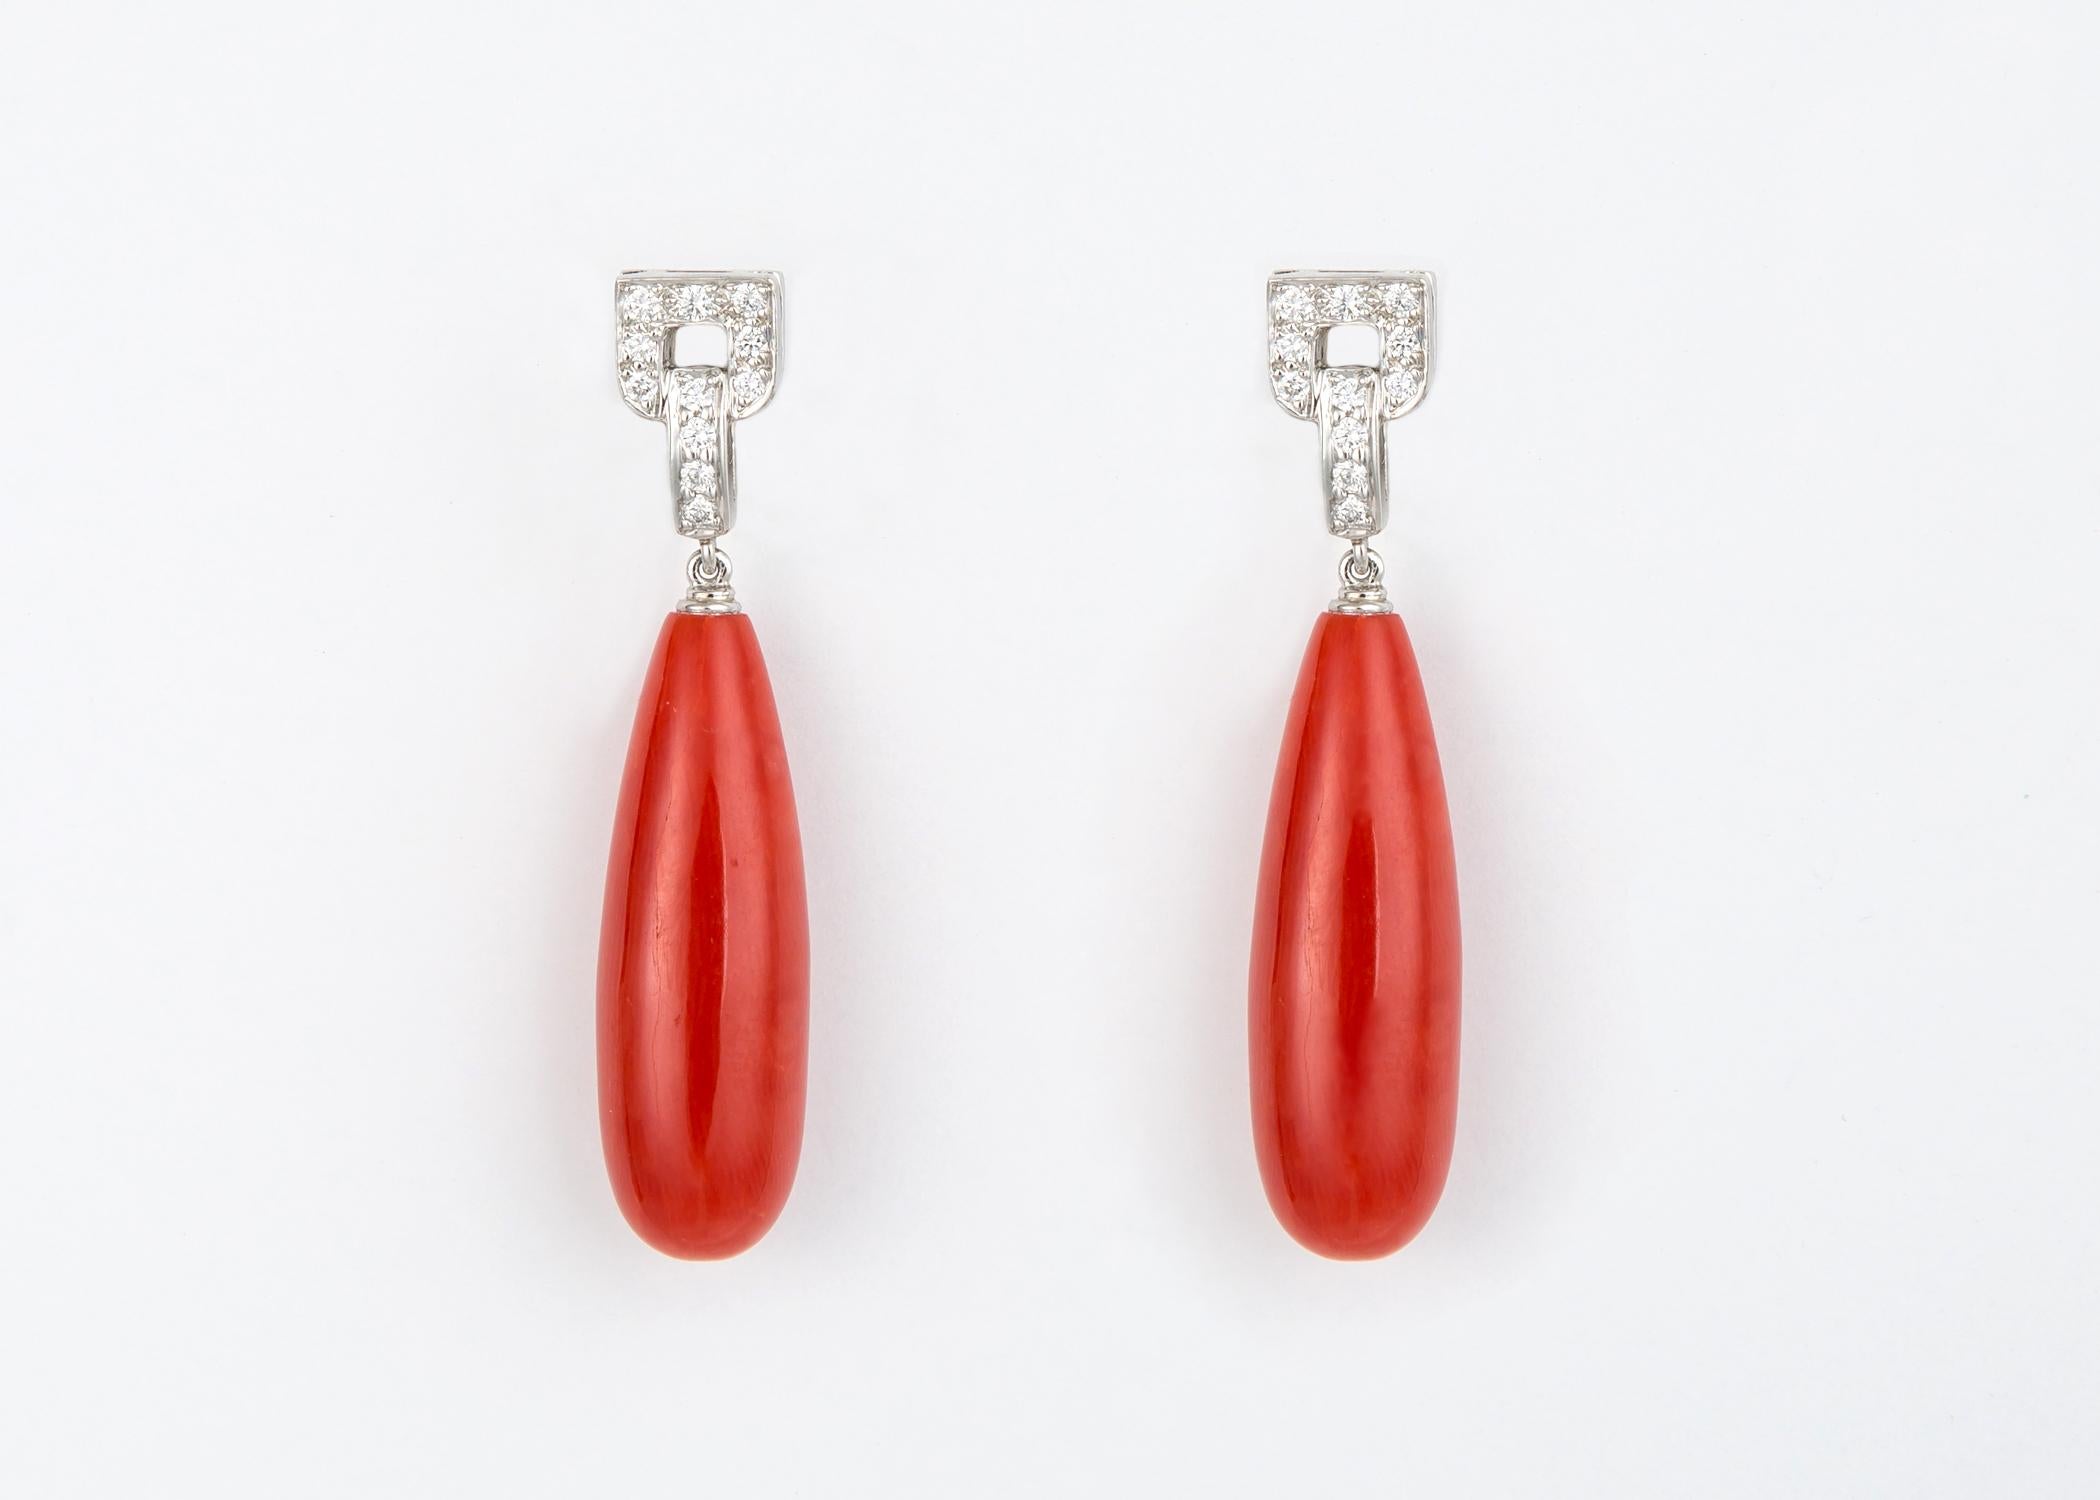 Contemporary  Tiffany & Co. Platinum Diamond and Coral Drop Earrings